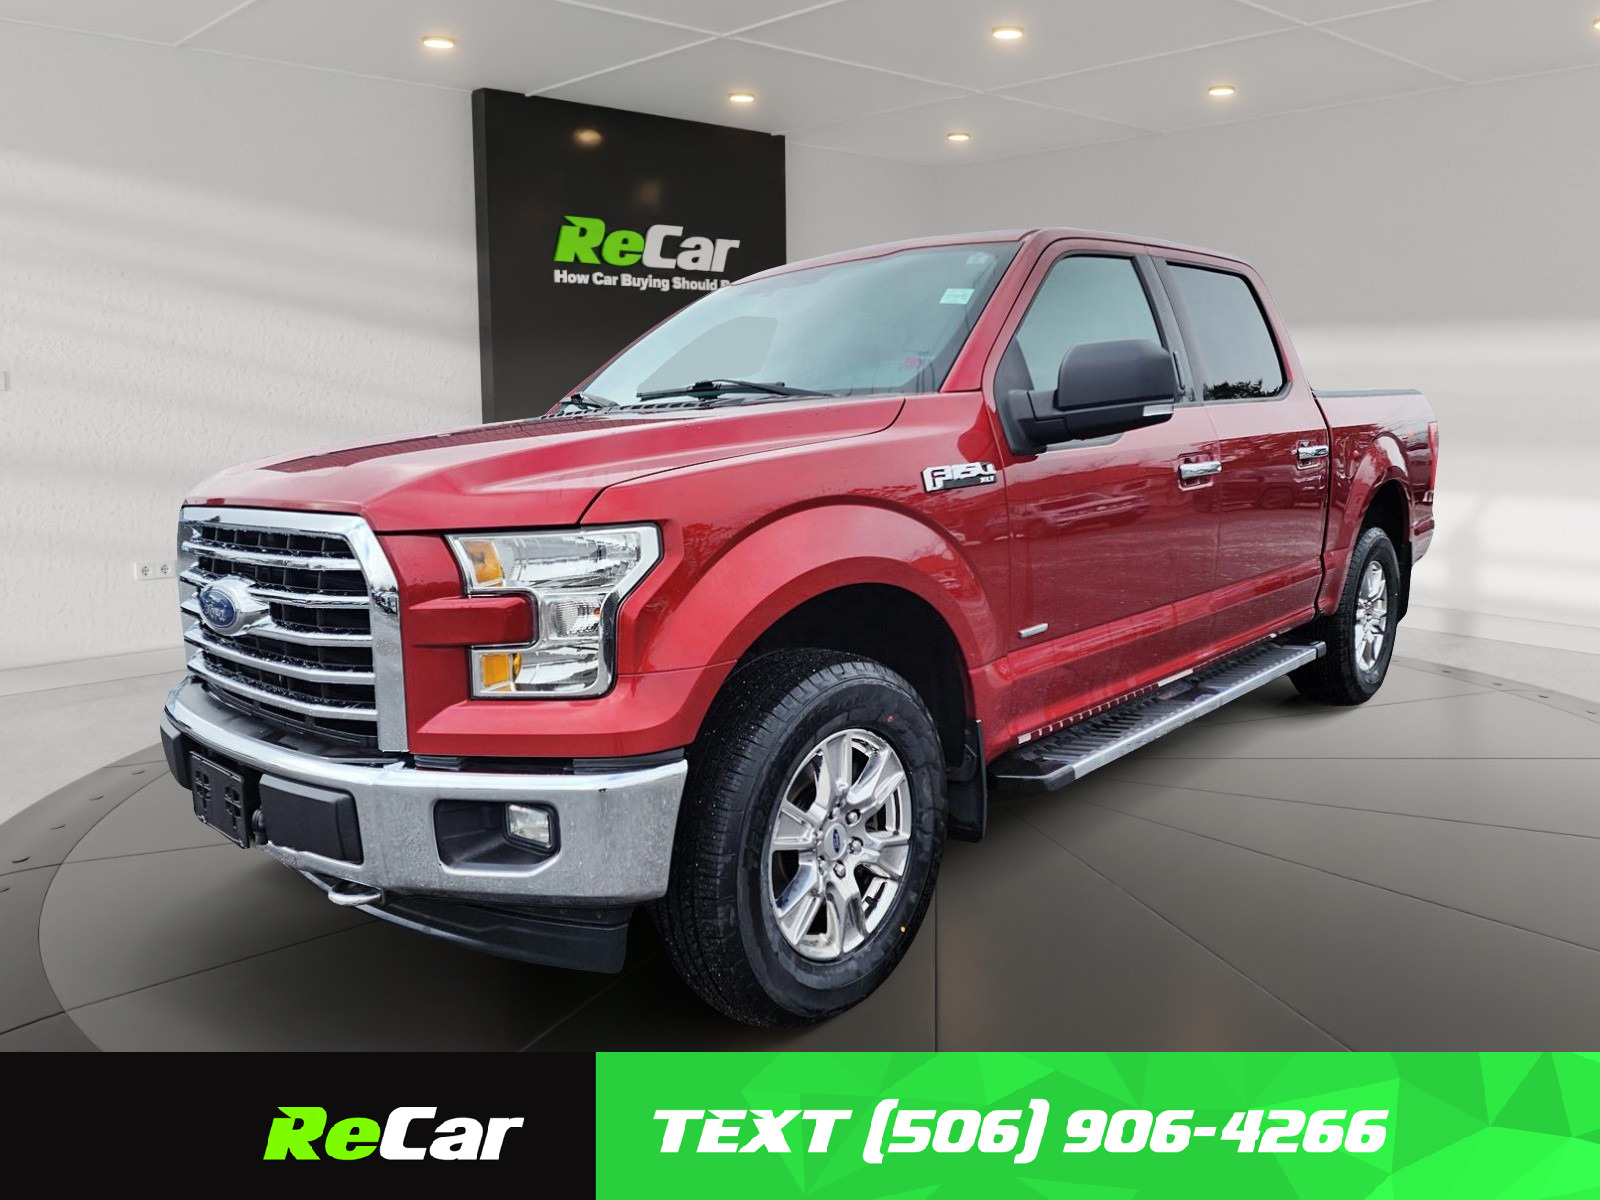 2017 Ford F-150 4X4 | Crew Cab | XTR Package | Touchscreen Multime